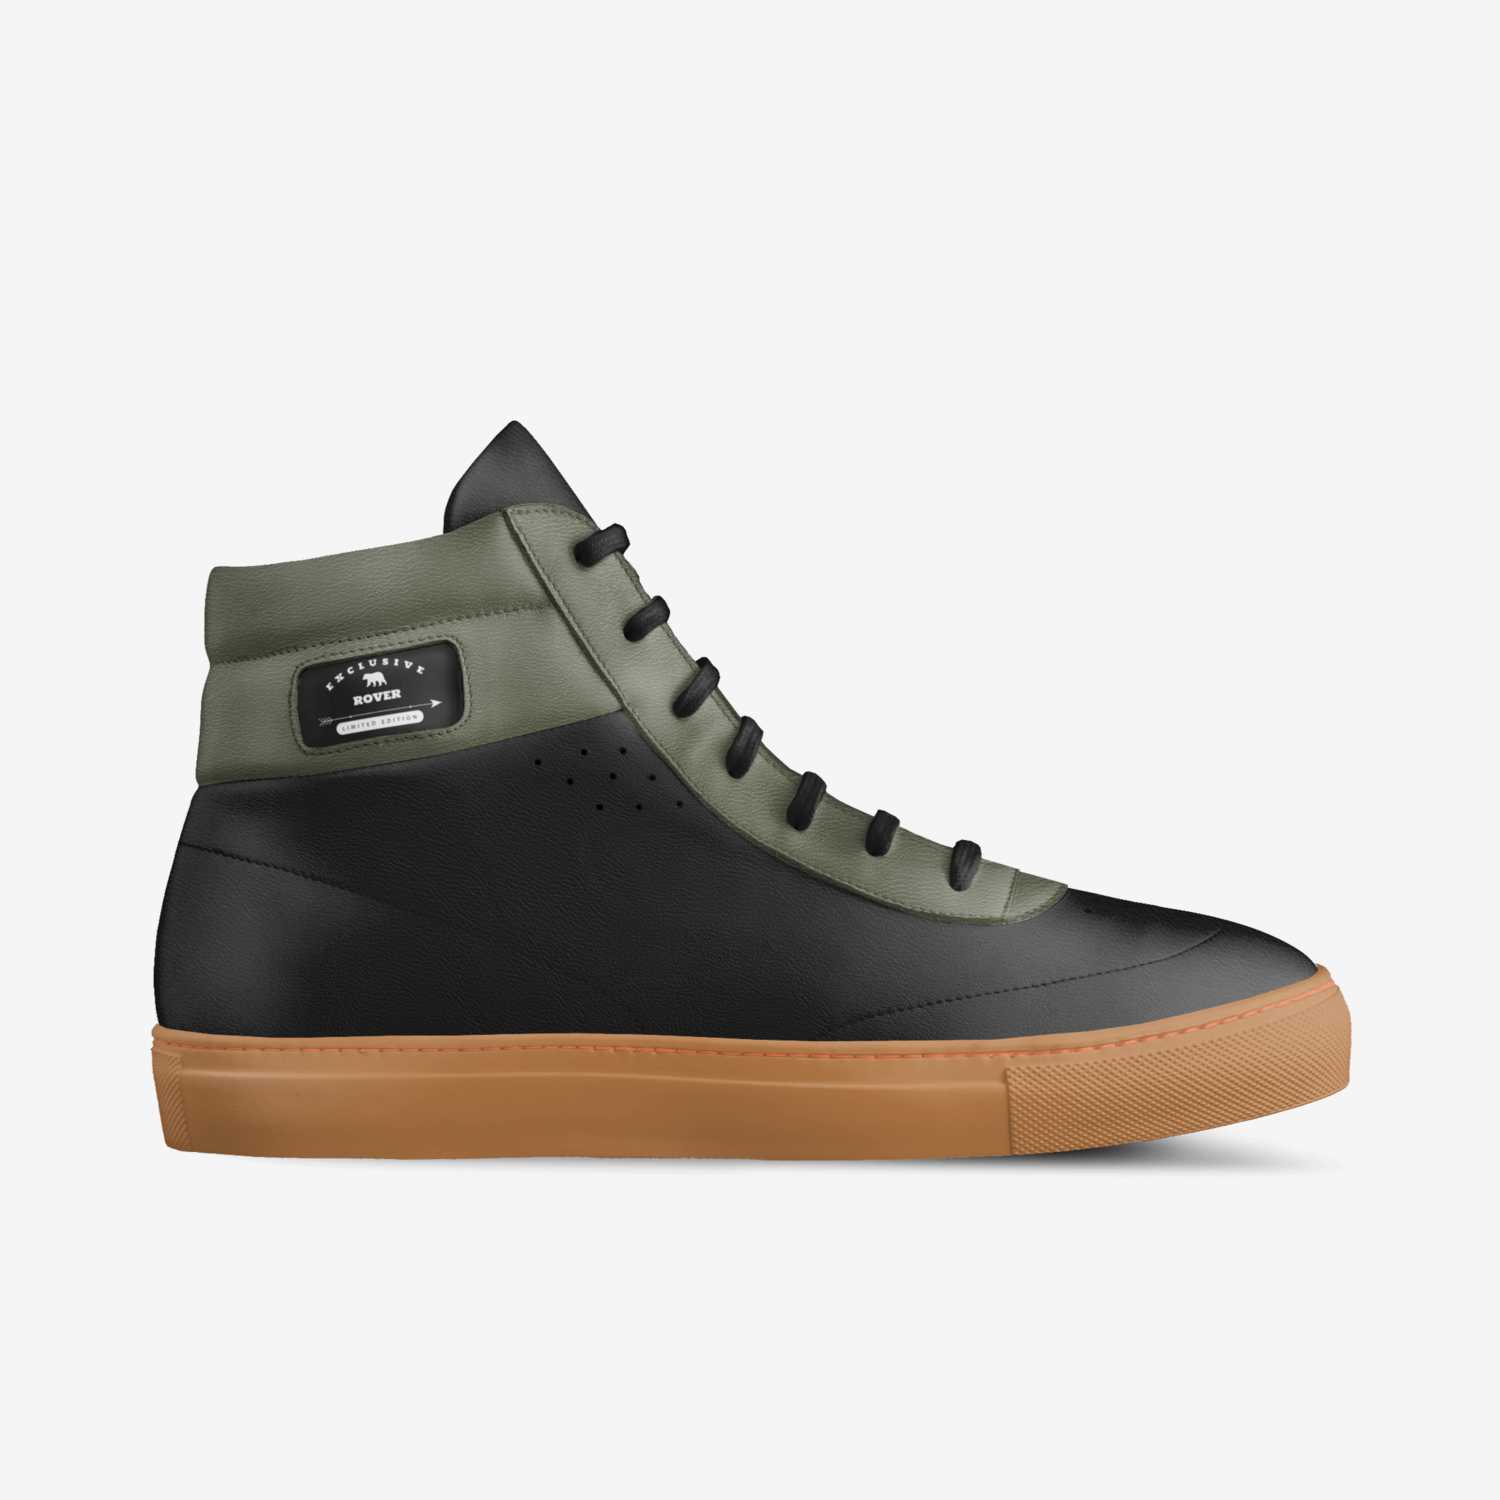 Rover | A Custom Shoe concept by Austin Hult